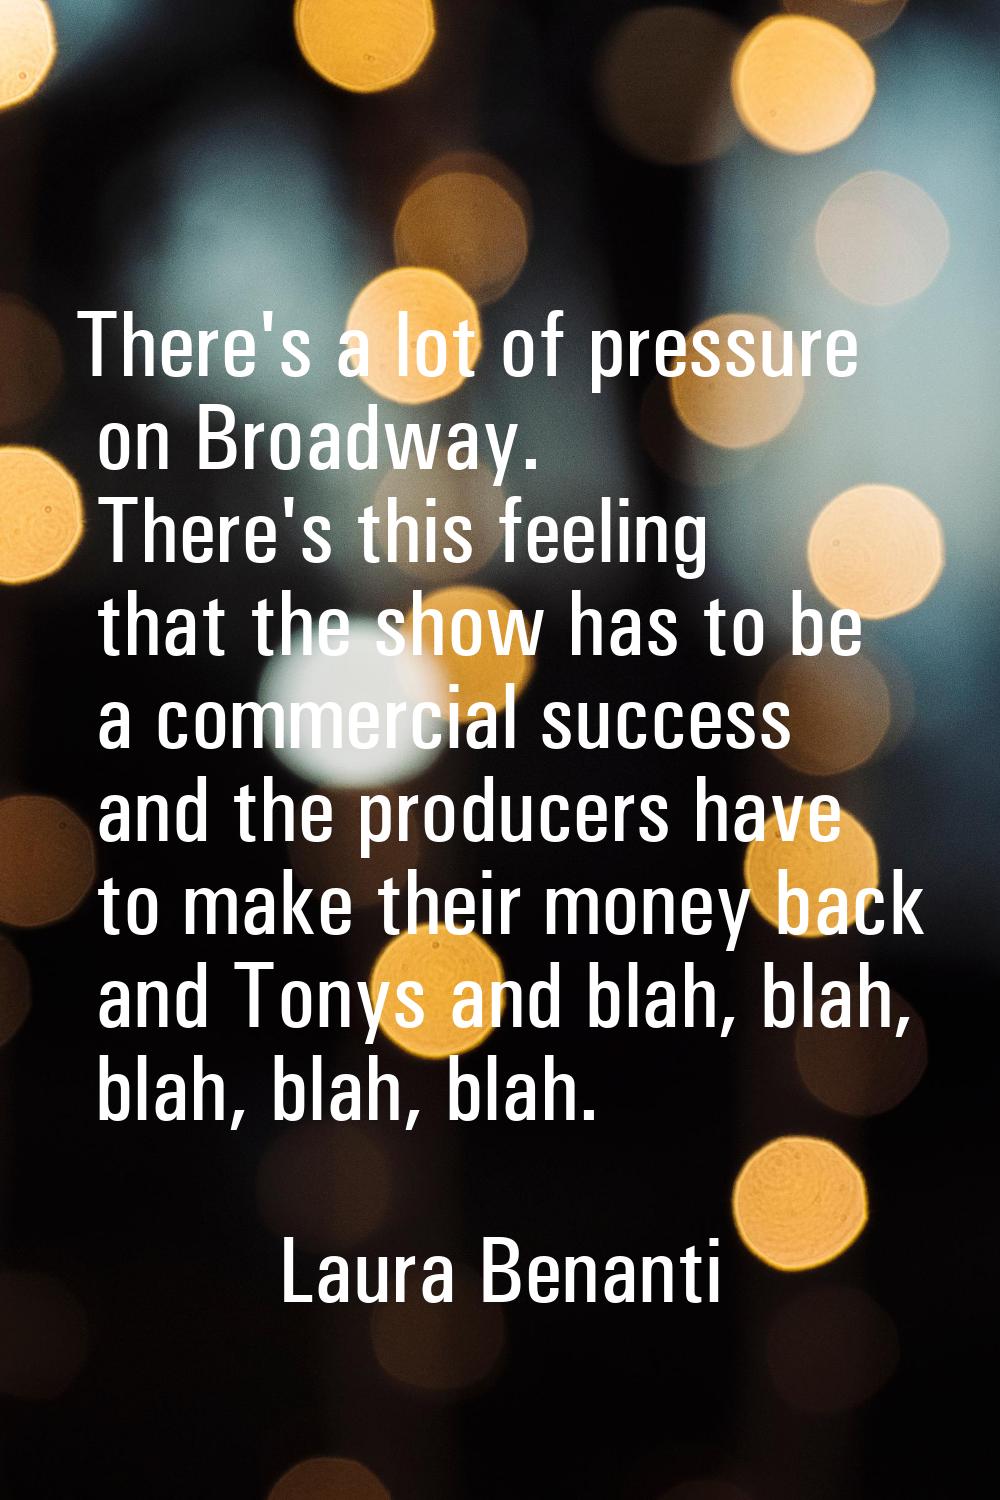 There's a lot of pressure on Broadway. There's this feeling that the show has to be a commercial su